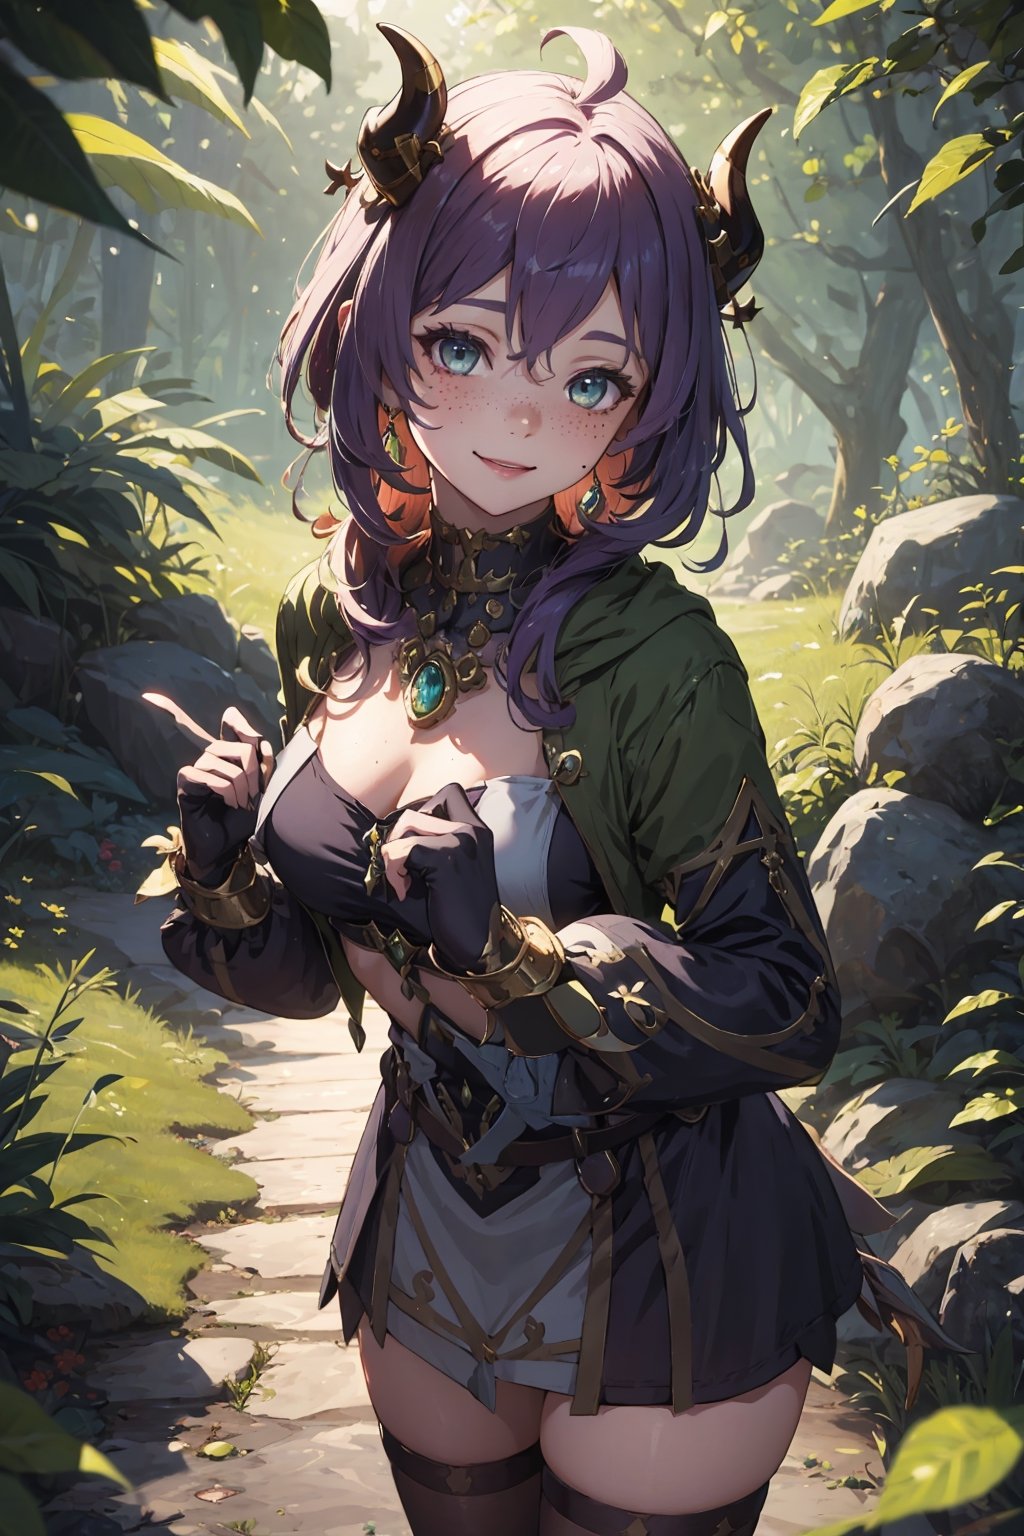 Imagine a female child with short messy vibrant purple hair in a short hair cut. She has small breasts. She has bright green eyes. She has pointed elf ears. She has two short horns on her head. She has an evil smile on her face that shows she's up to no good. She has warm freckles on her face. She wears a long green trench coat. The background is a charming forest path in the enchanted woods with bright lighting, creating a magical ambiance. This artwork captures the essence of mischief and magic against the backdrop of a beautiful setting. detailed, detail_eyes, detailed_hair, detailed_scenario, detailed_hands, detailed_background, vox machina style,vox machina style,oil impasto, flat chest.,,niloudef